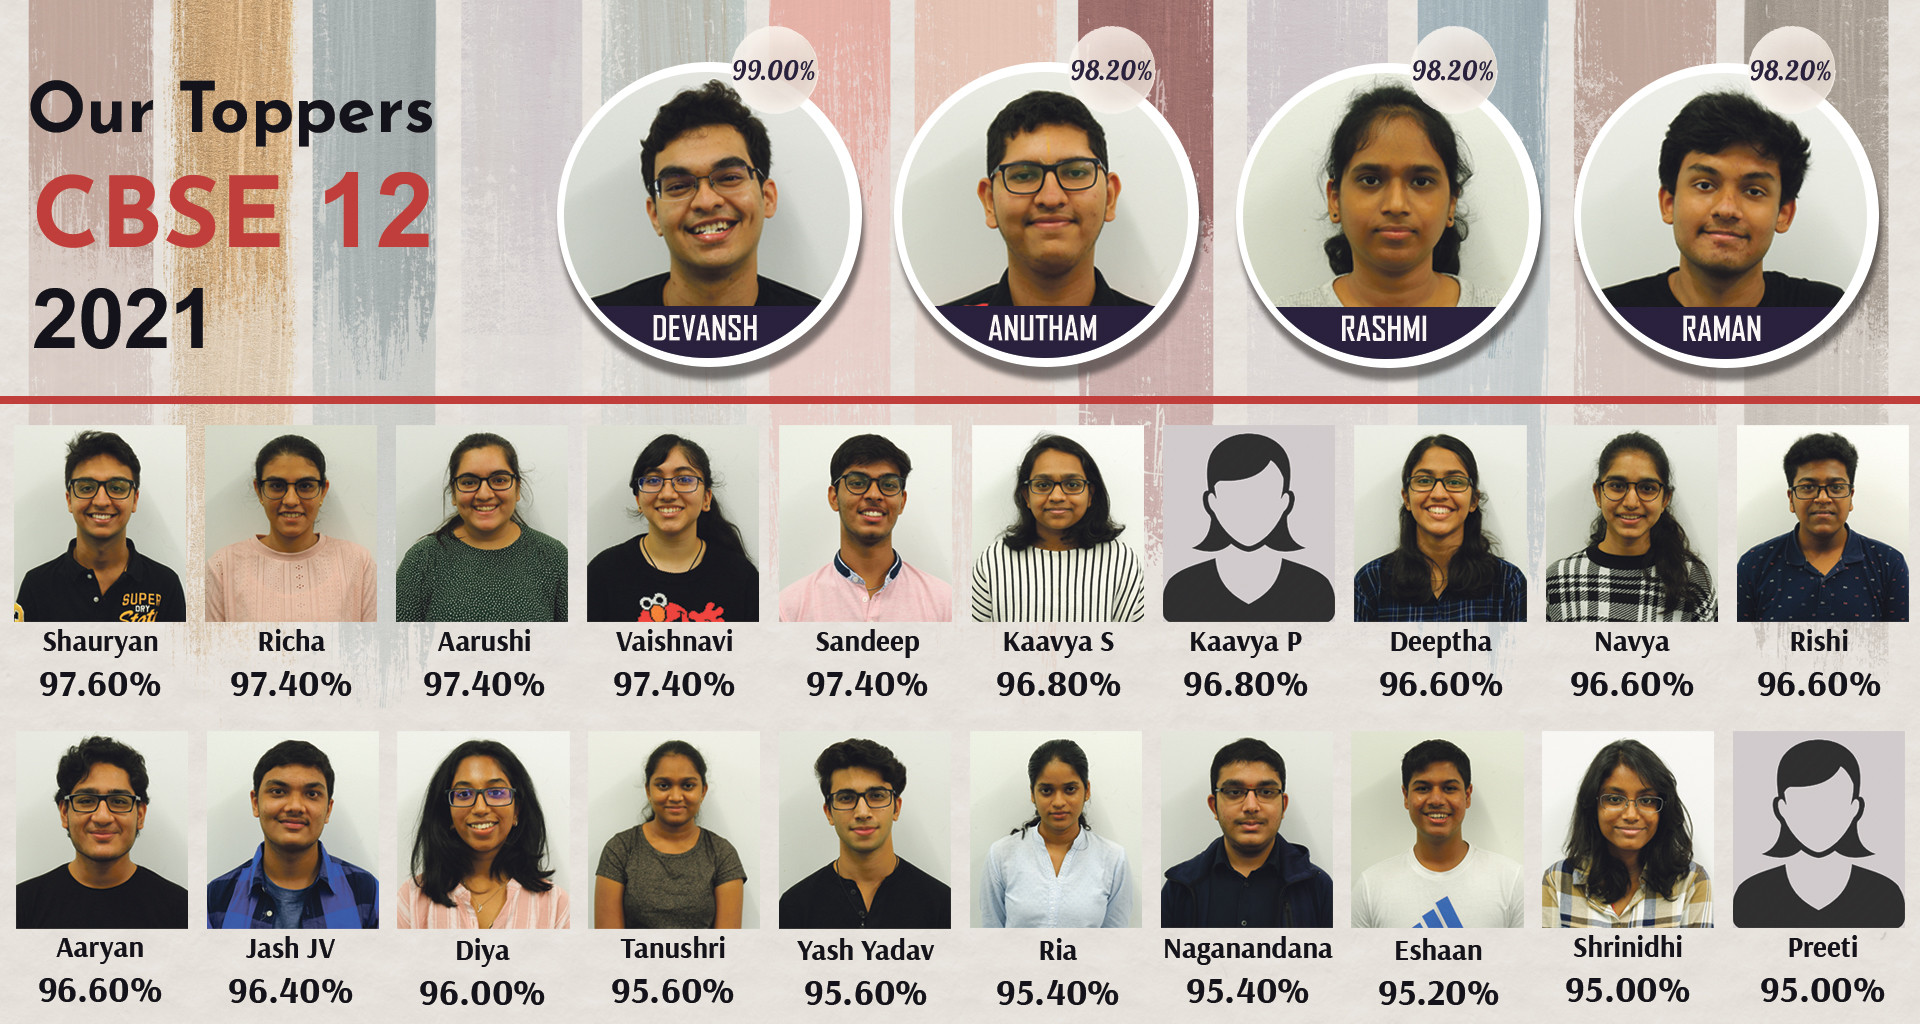 CBSE 12 Toppers - 2021